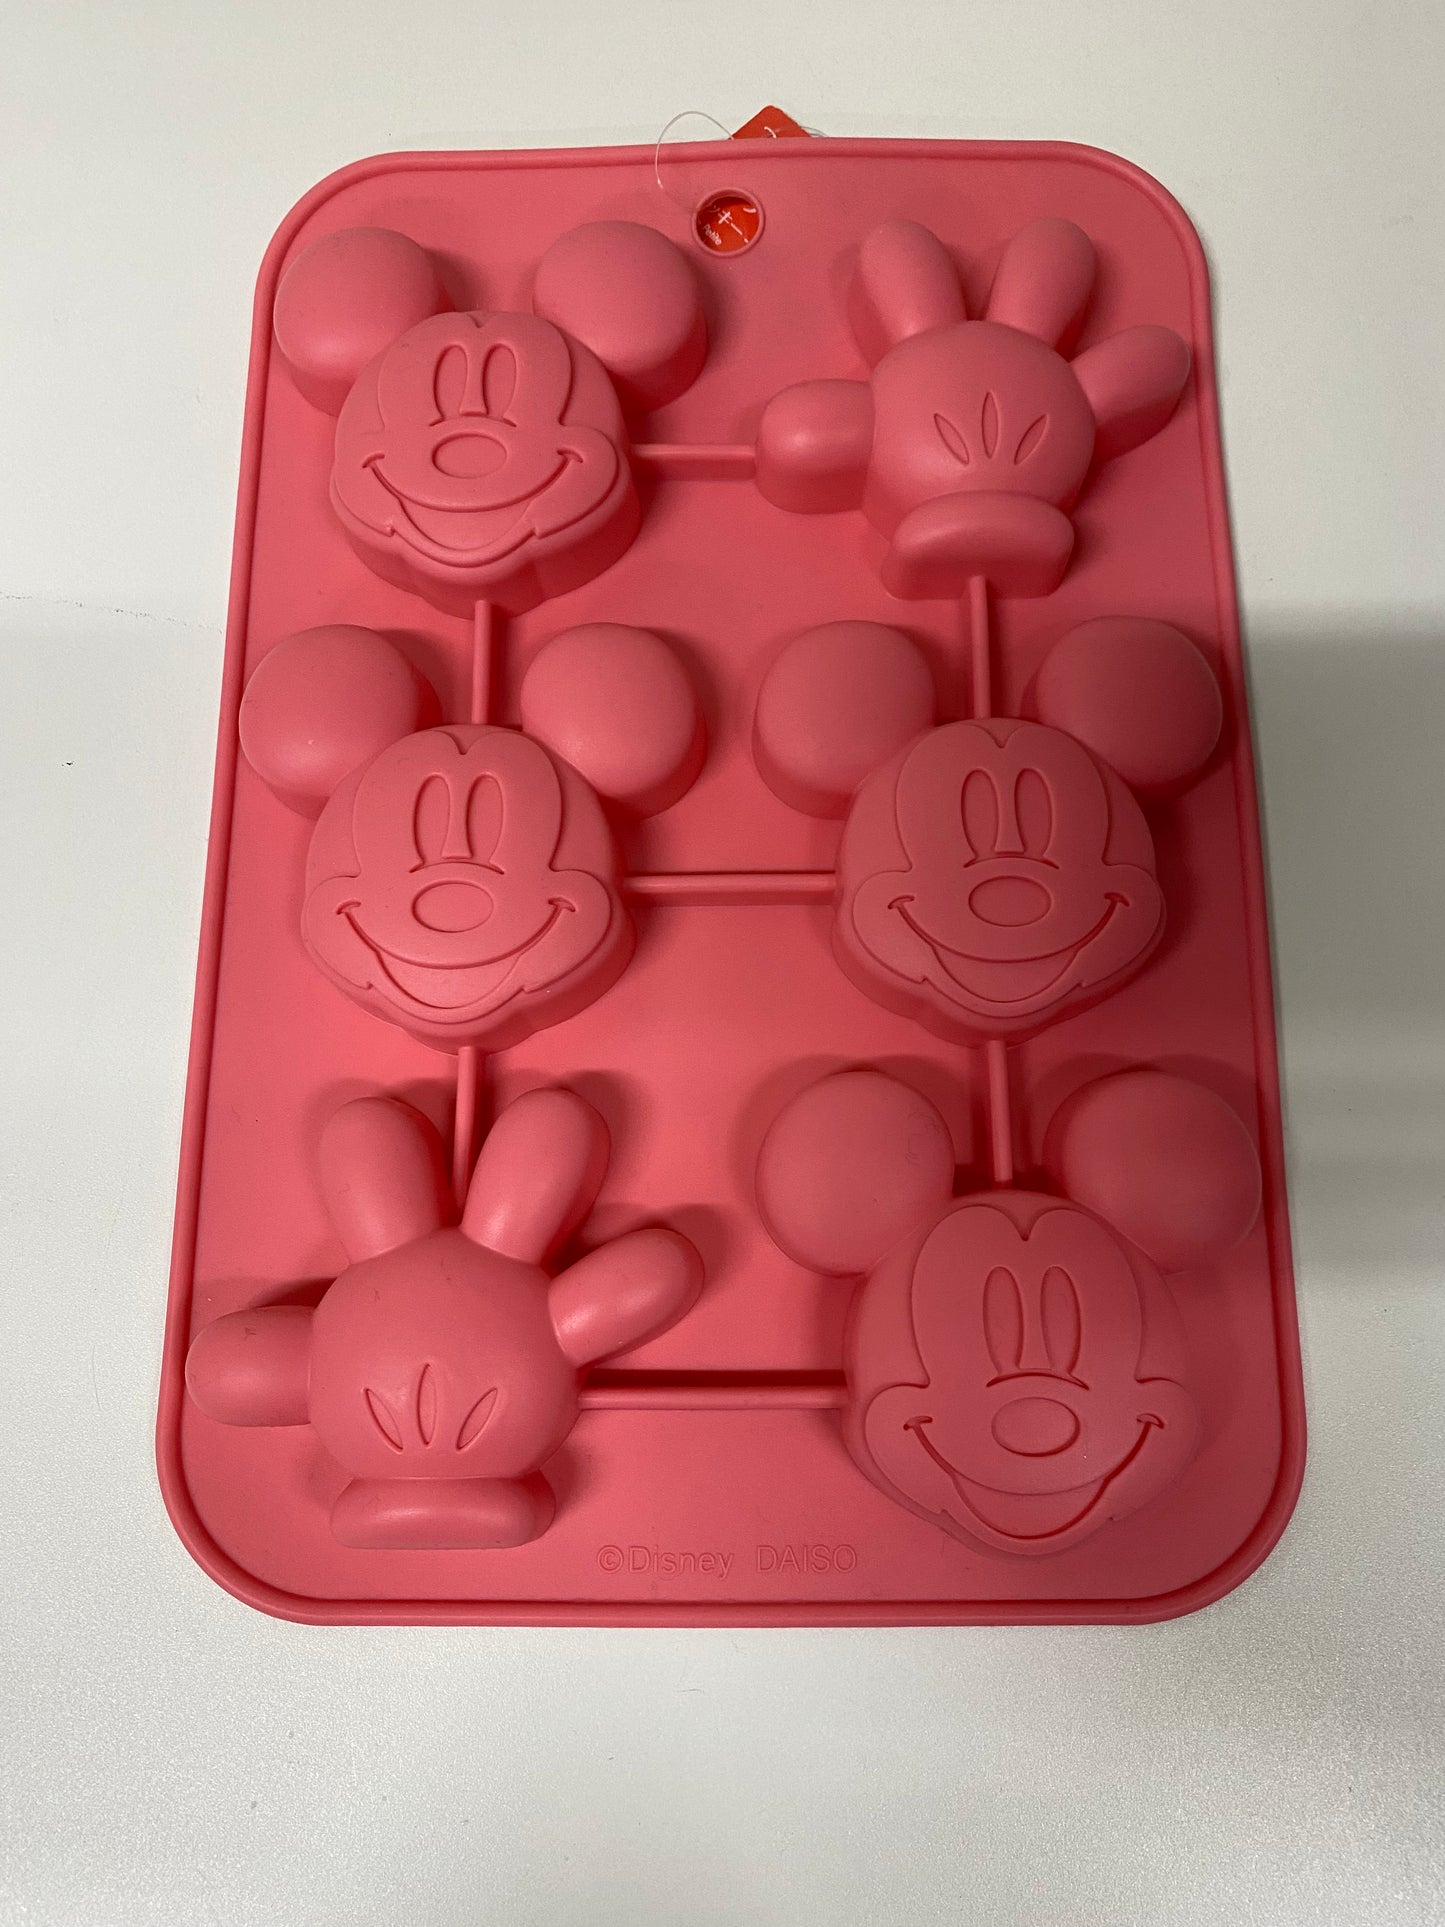 Japan Disney 3D Mickey with Hand Silicone Petite Cake Chocolate Ice Jelly Candle Mold